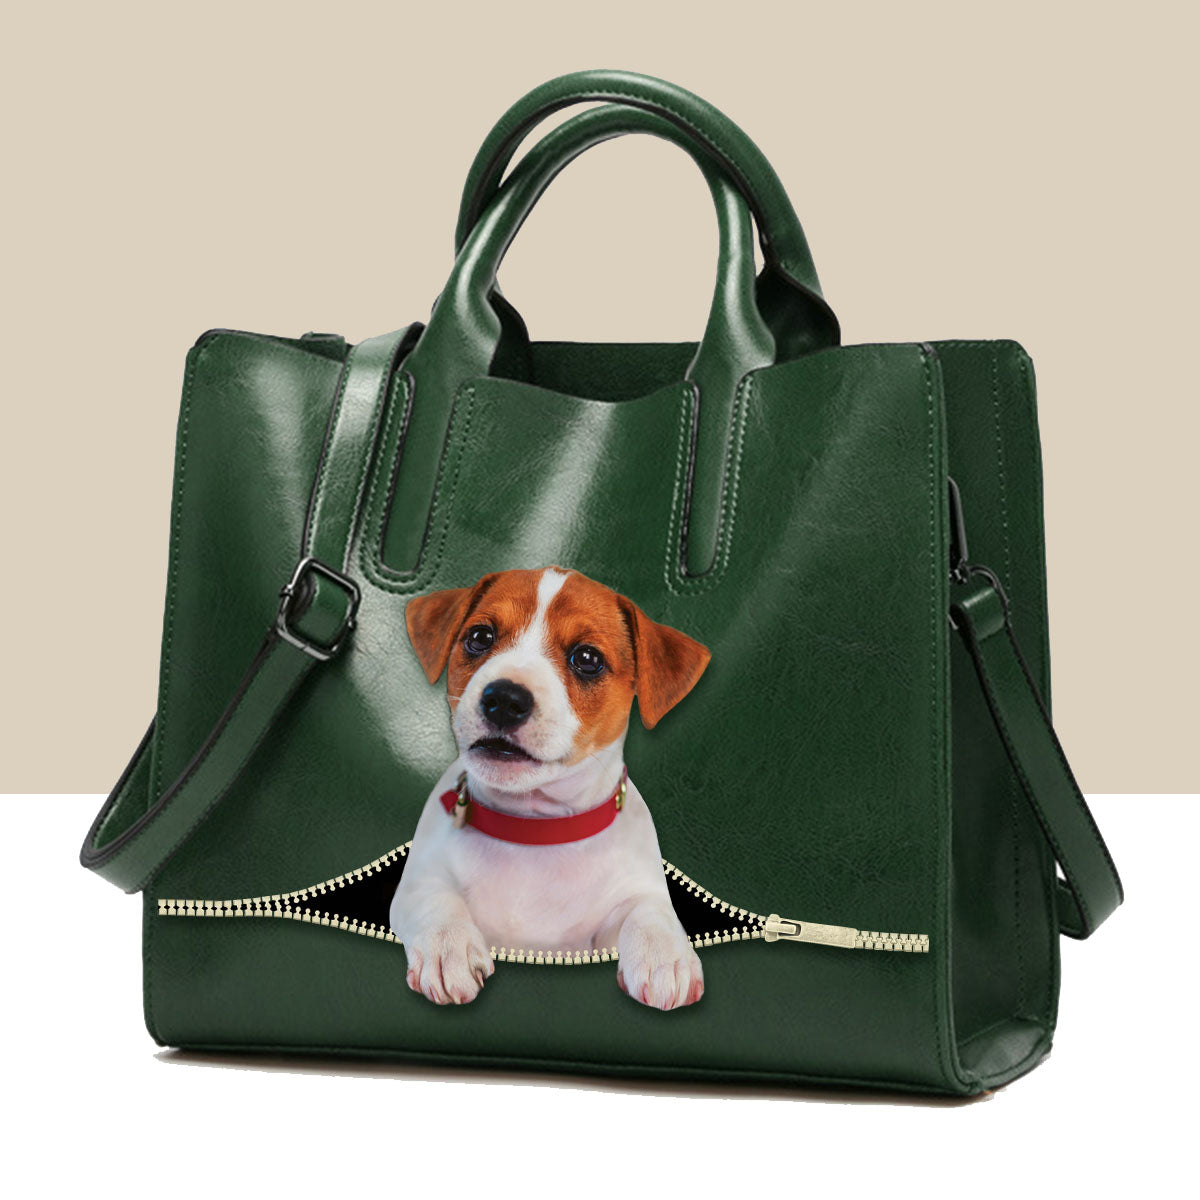 Chill Out Time With Jack Russell Terrier - Luxury Handbag V2